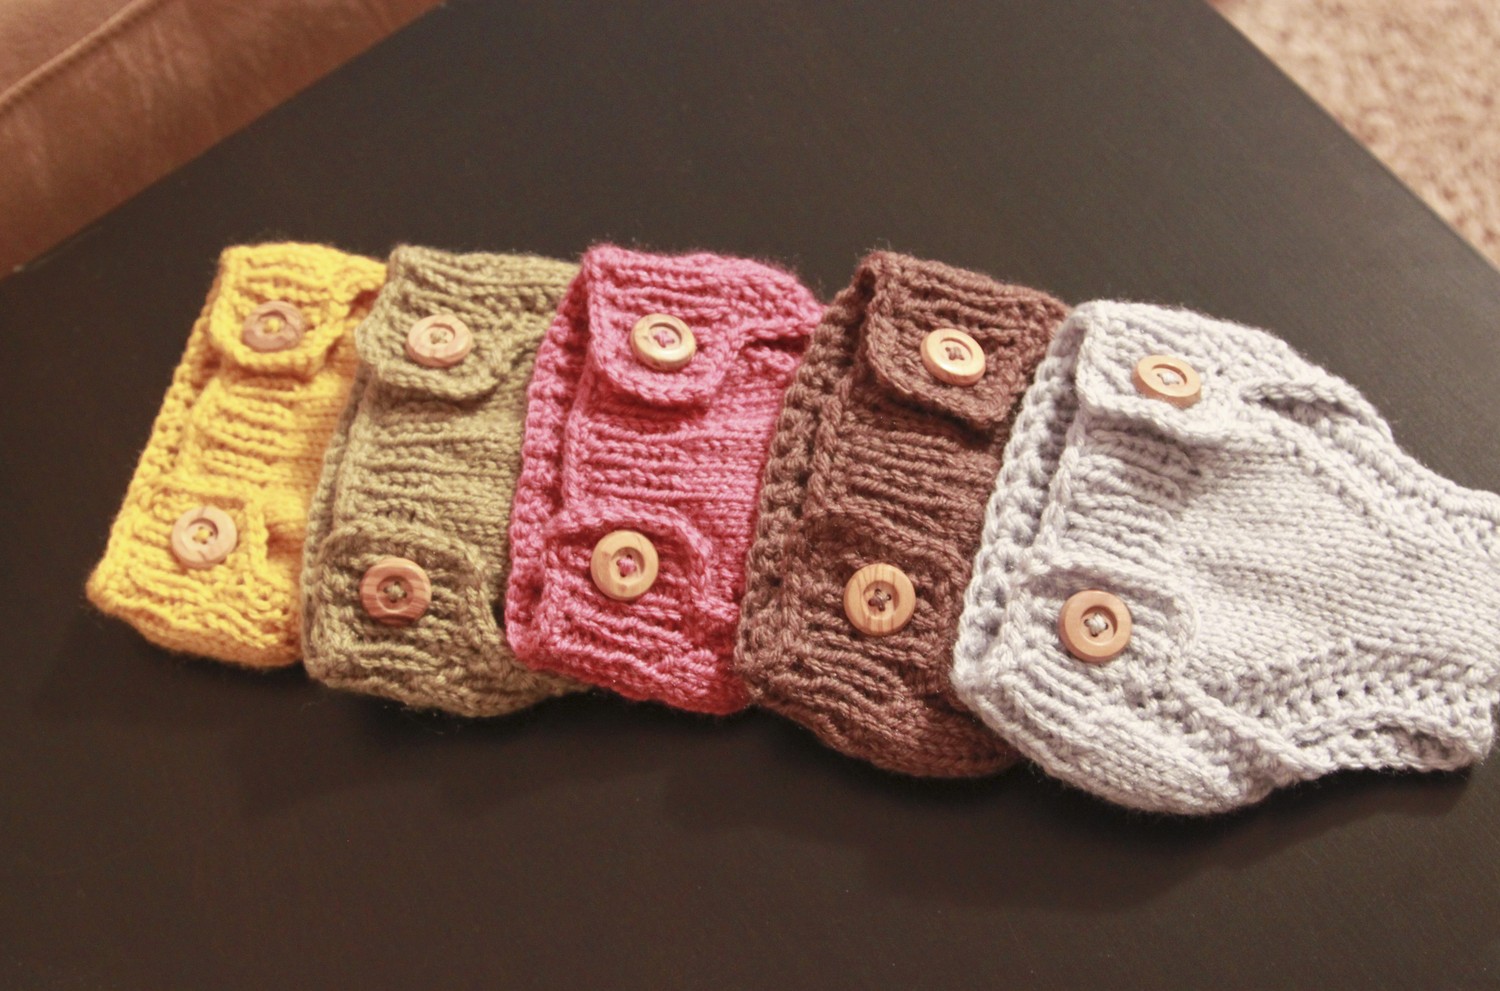 Wooden buttoned newborn covers